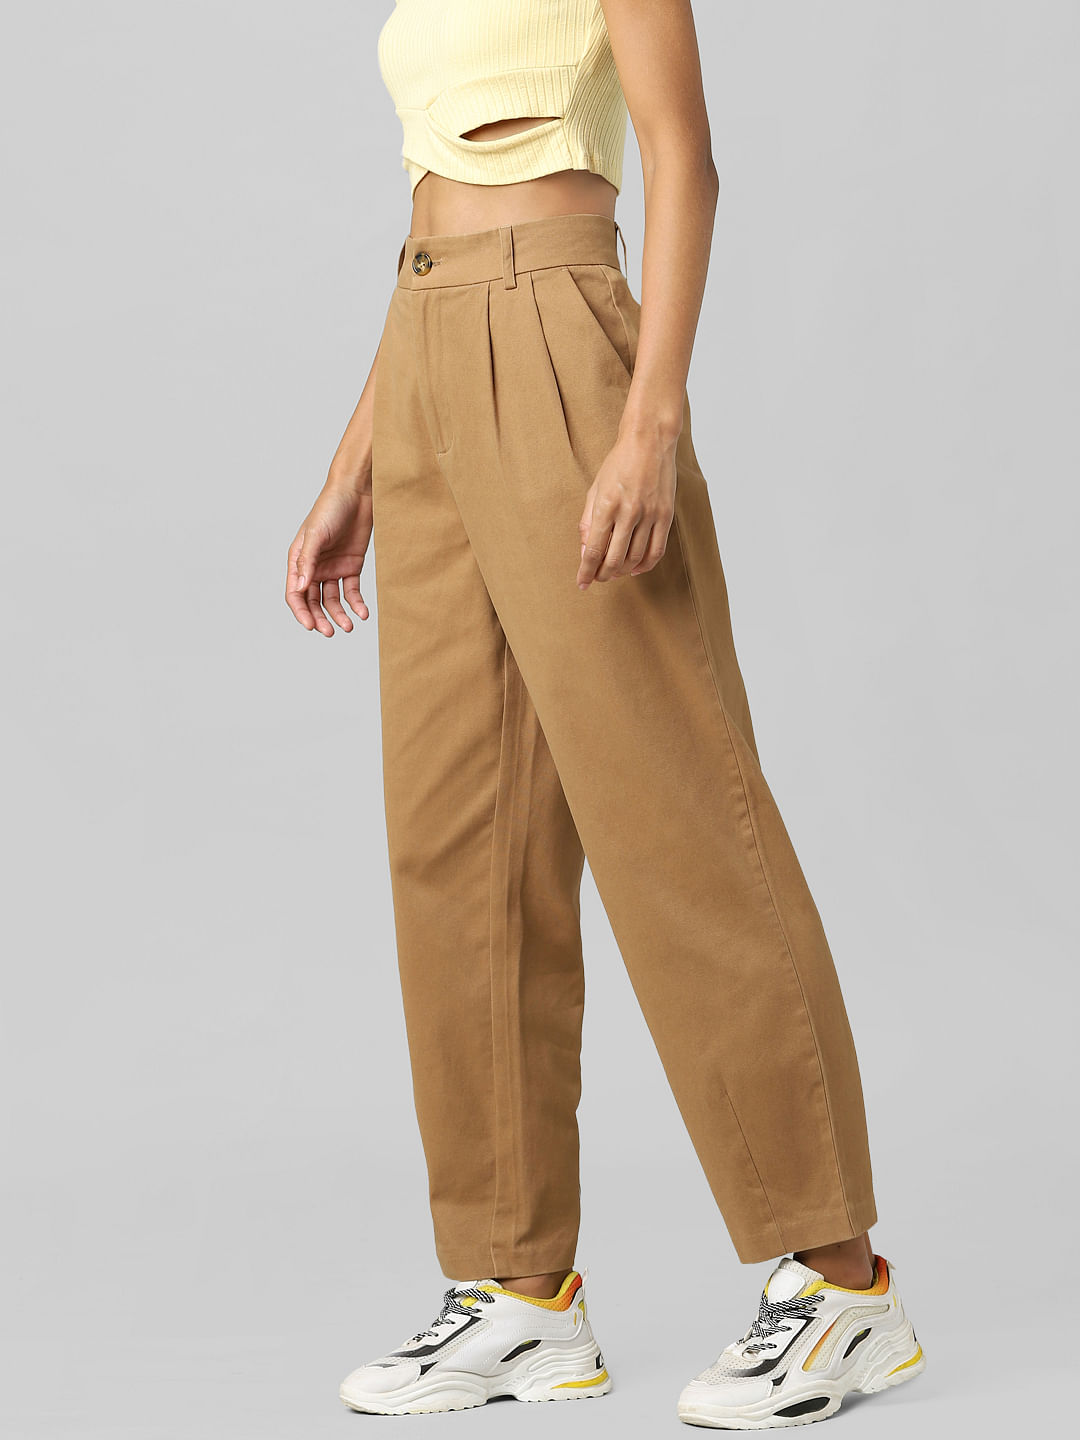 corduroy dark brown highwaisted trousers Womens Fashion Bottoms Other  Bottoms on Carousell